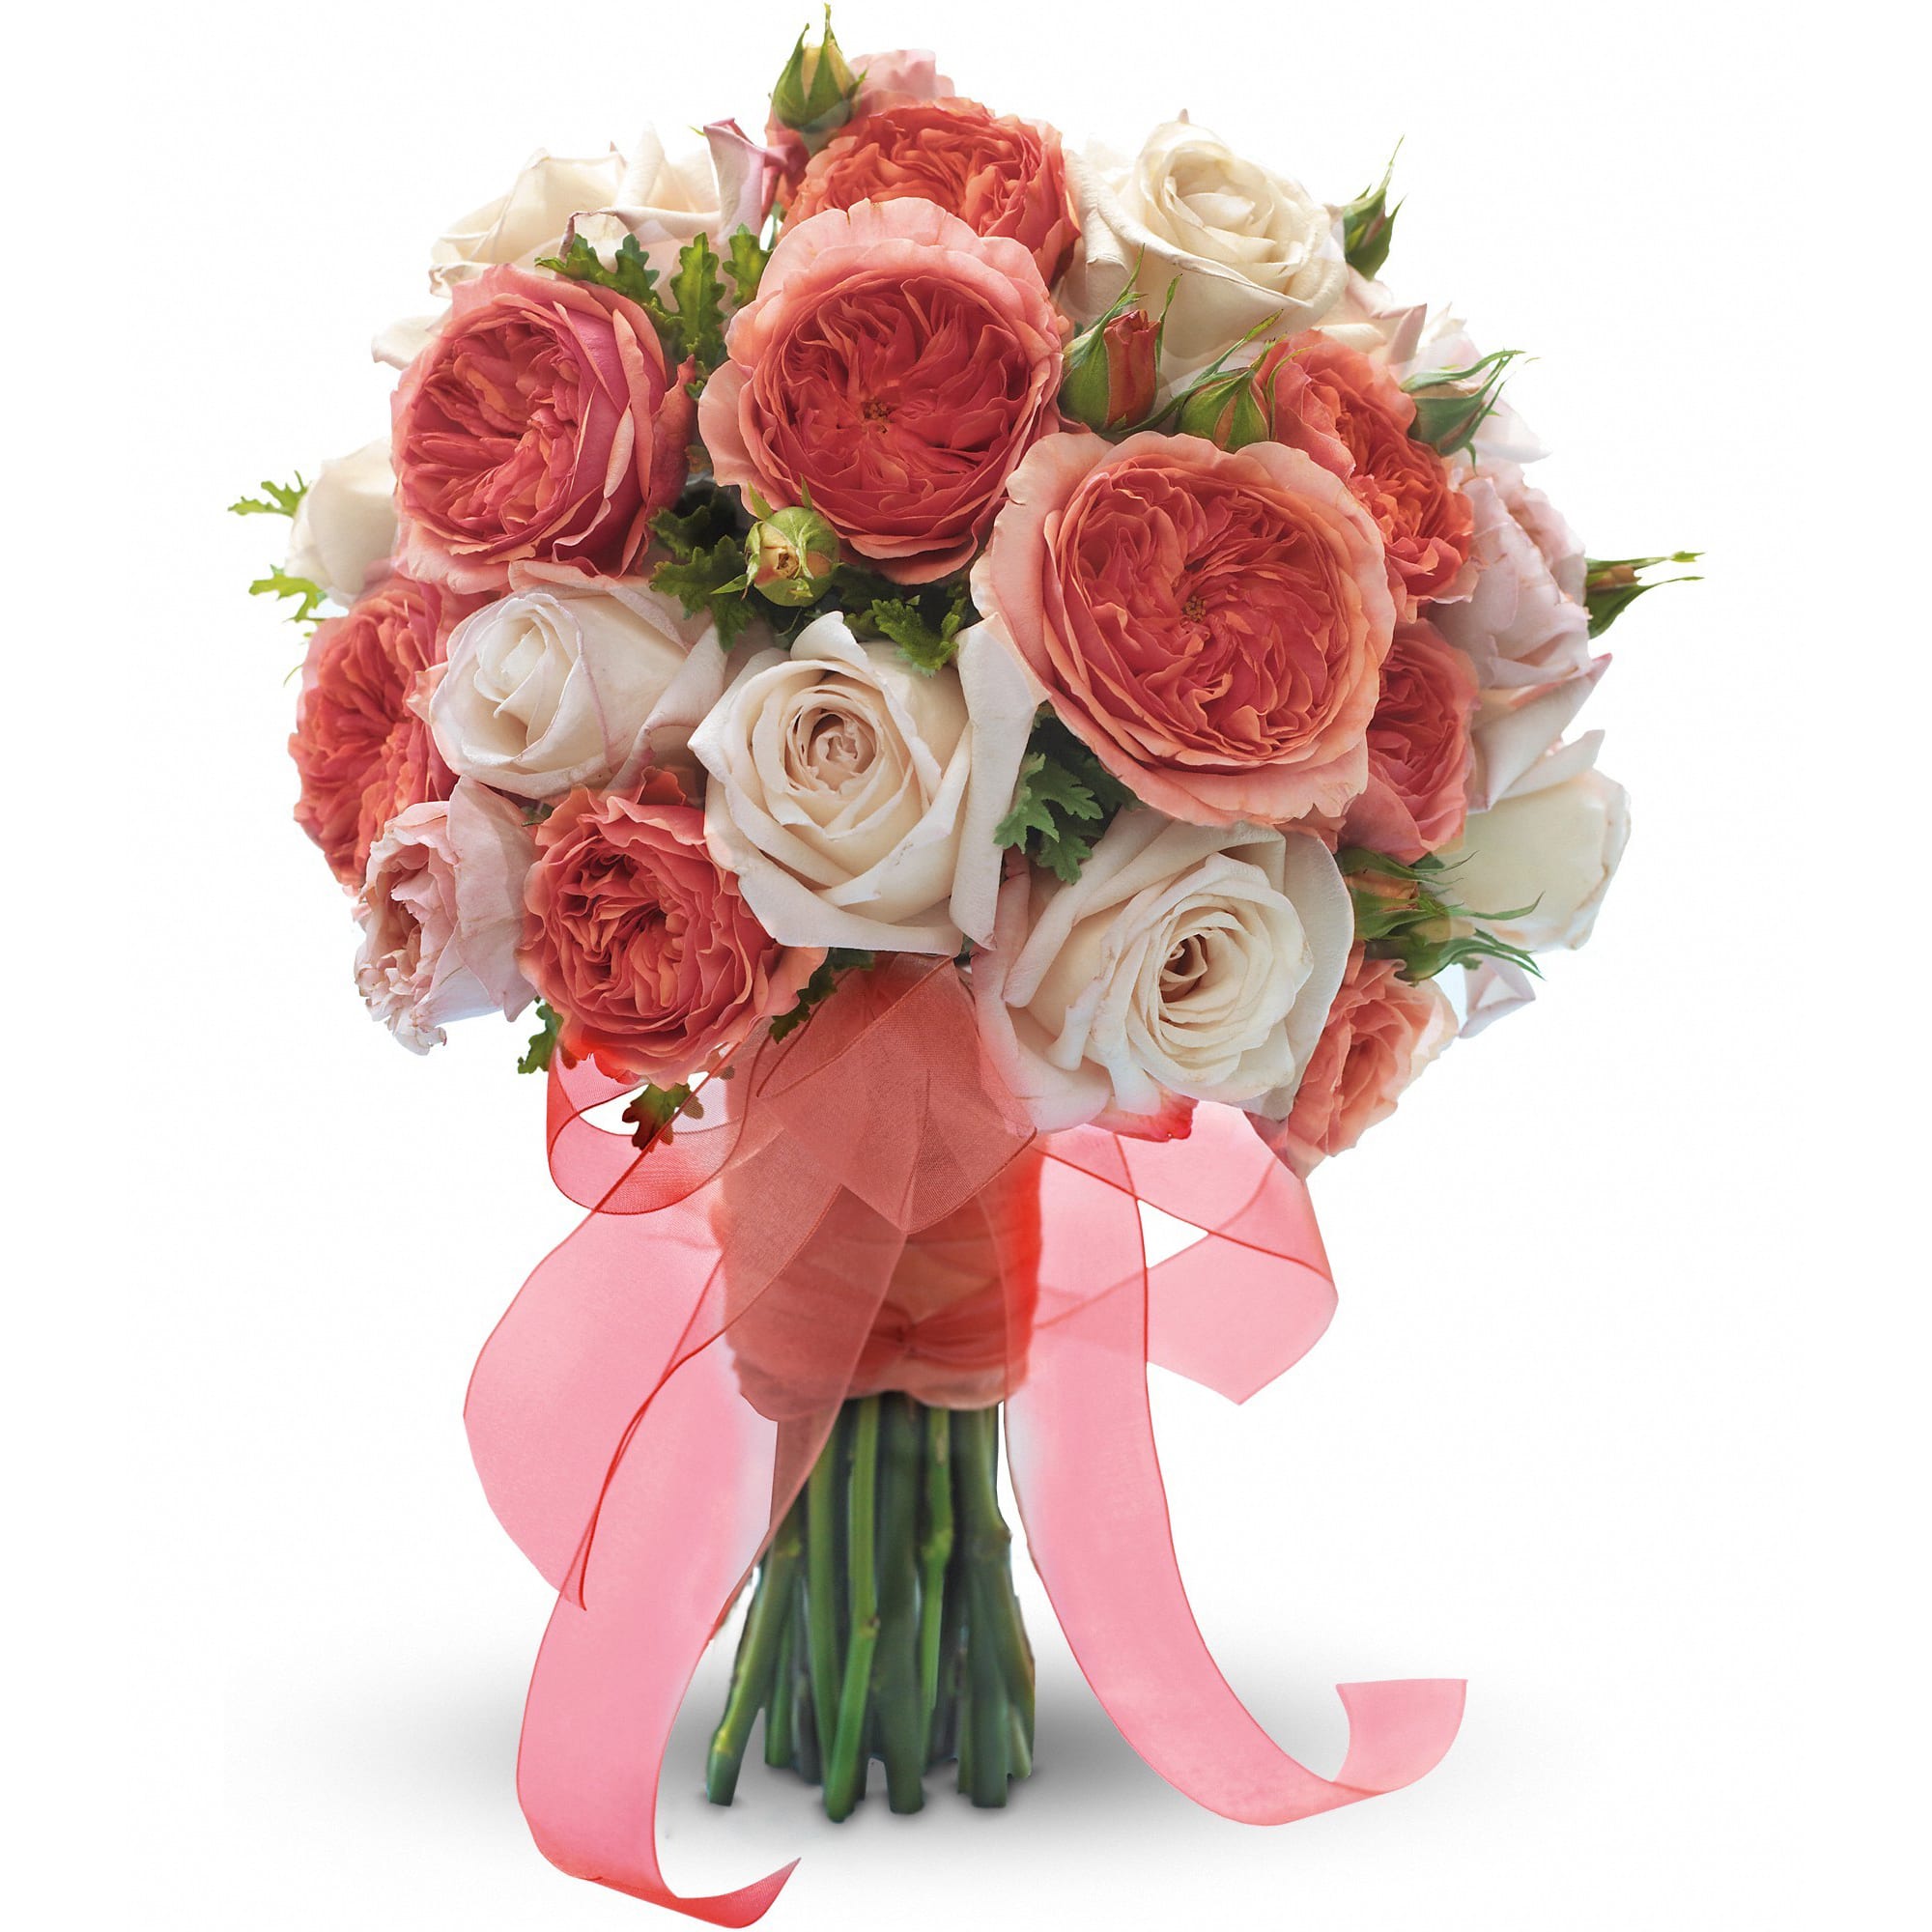 Lady Love Bouquet  - This stylish mix of light pink roses with dense pink garden roses has a sophisticated look.    Light pink roses with dense pink garden roses and pink scented geranium.    Approximately 12&quot; W x 15 1/2&quot; H    Orientation: N/A        As Shown : T194-2A    